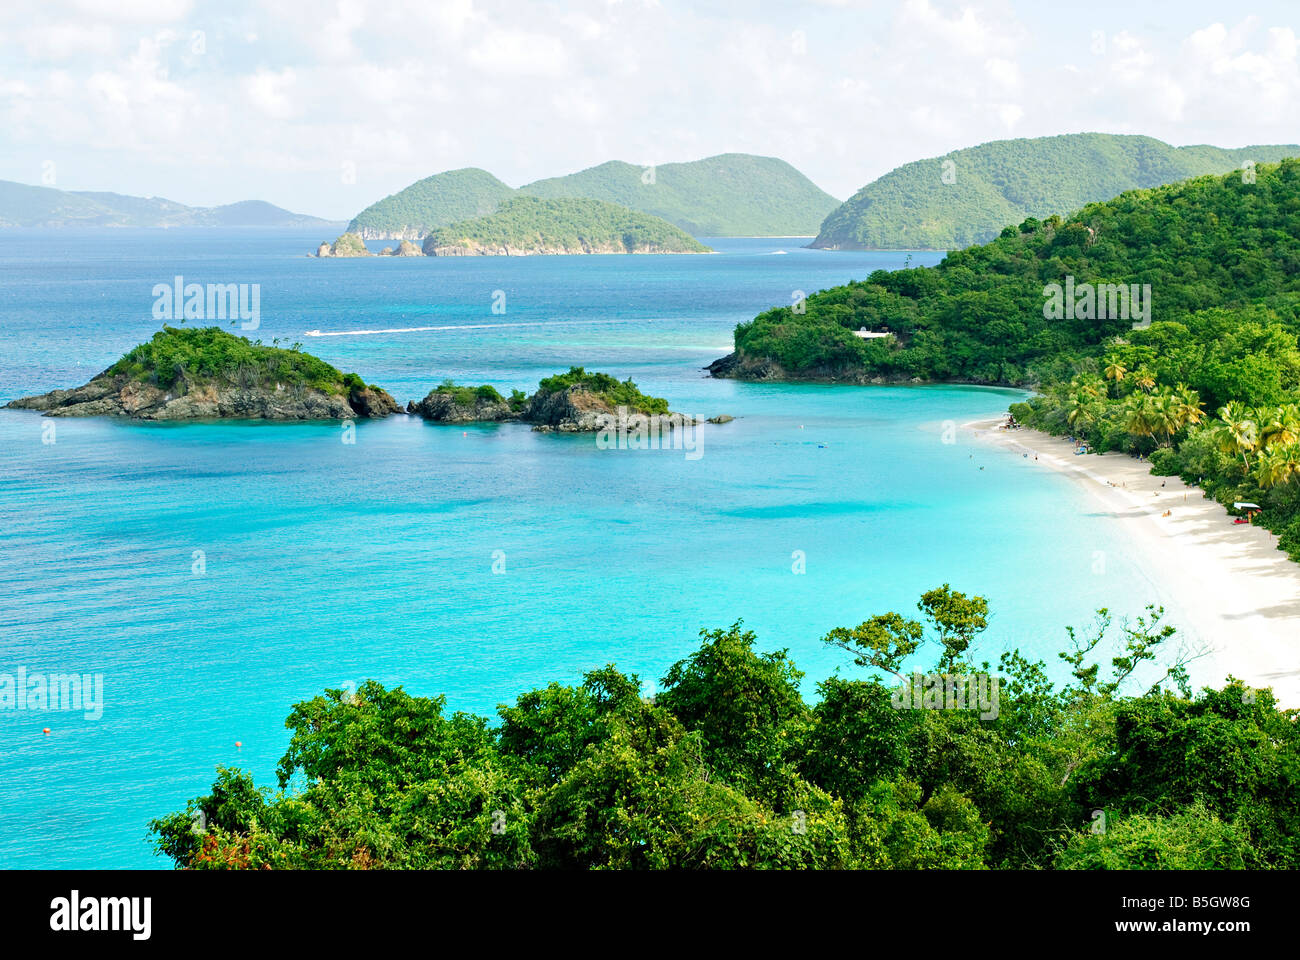 ST JOHN, US Virgin Islands - Elevated view of the beautiful Trunk Bay, an iconic white sandy beach on St. John, US Virgin Islands in the Caribbean. Stock Photo